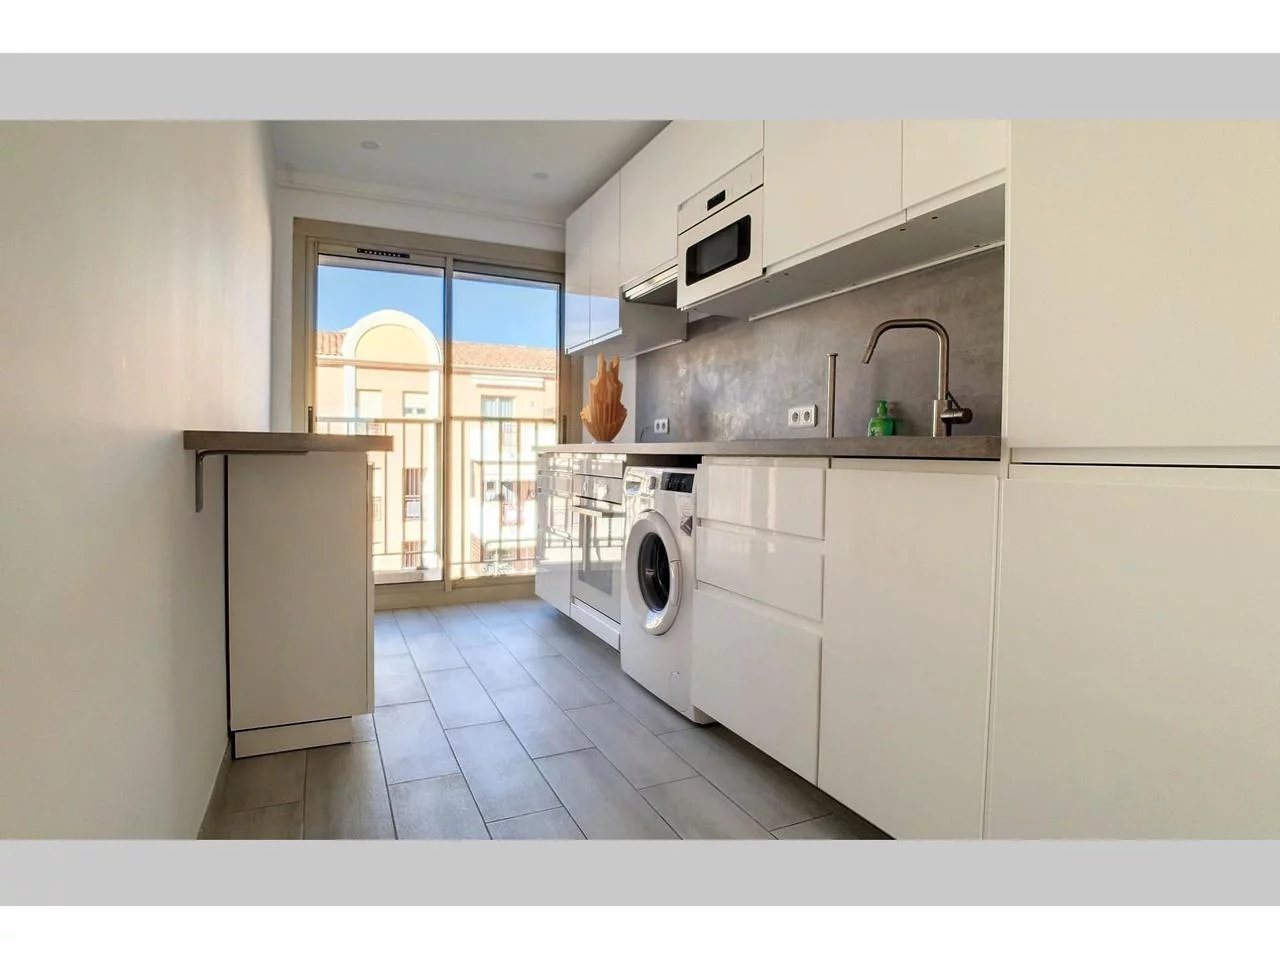 Appartement  3 Rooms 78.47m2  for sale   489 000 €